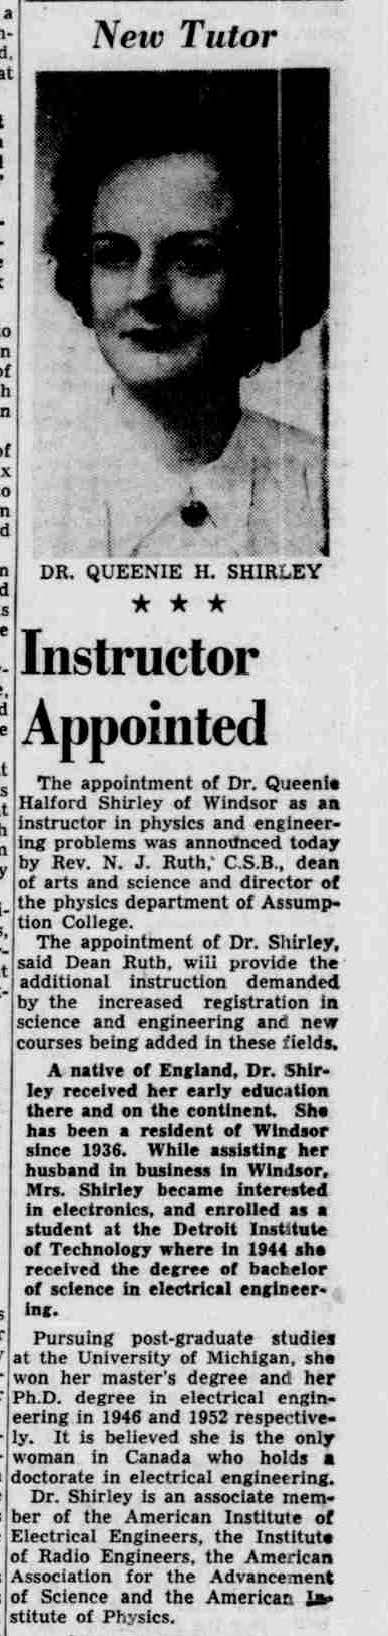 Dr. Queenie Halford Shirley Assumption College Appointment